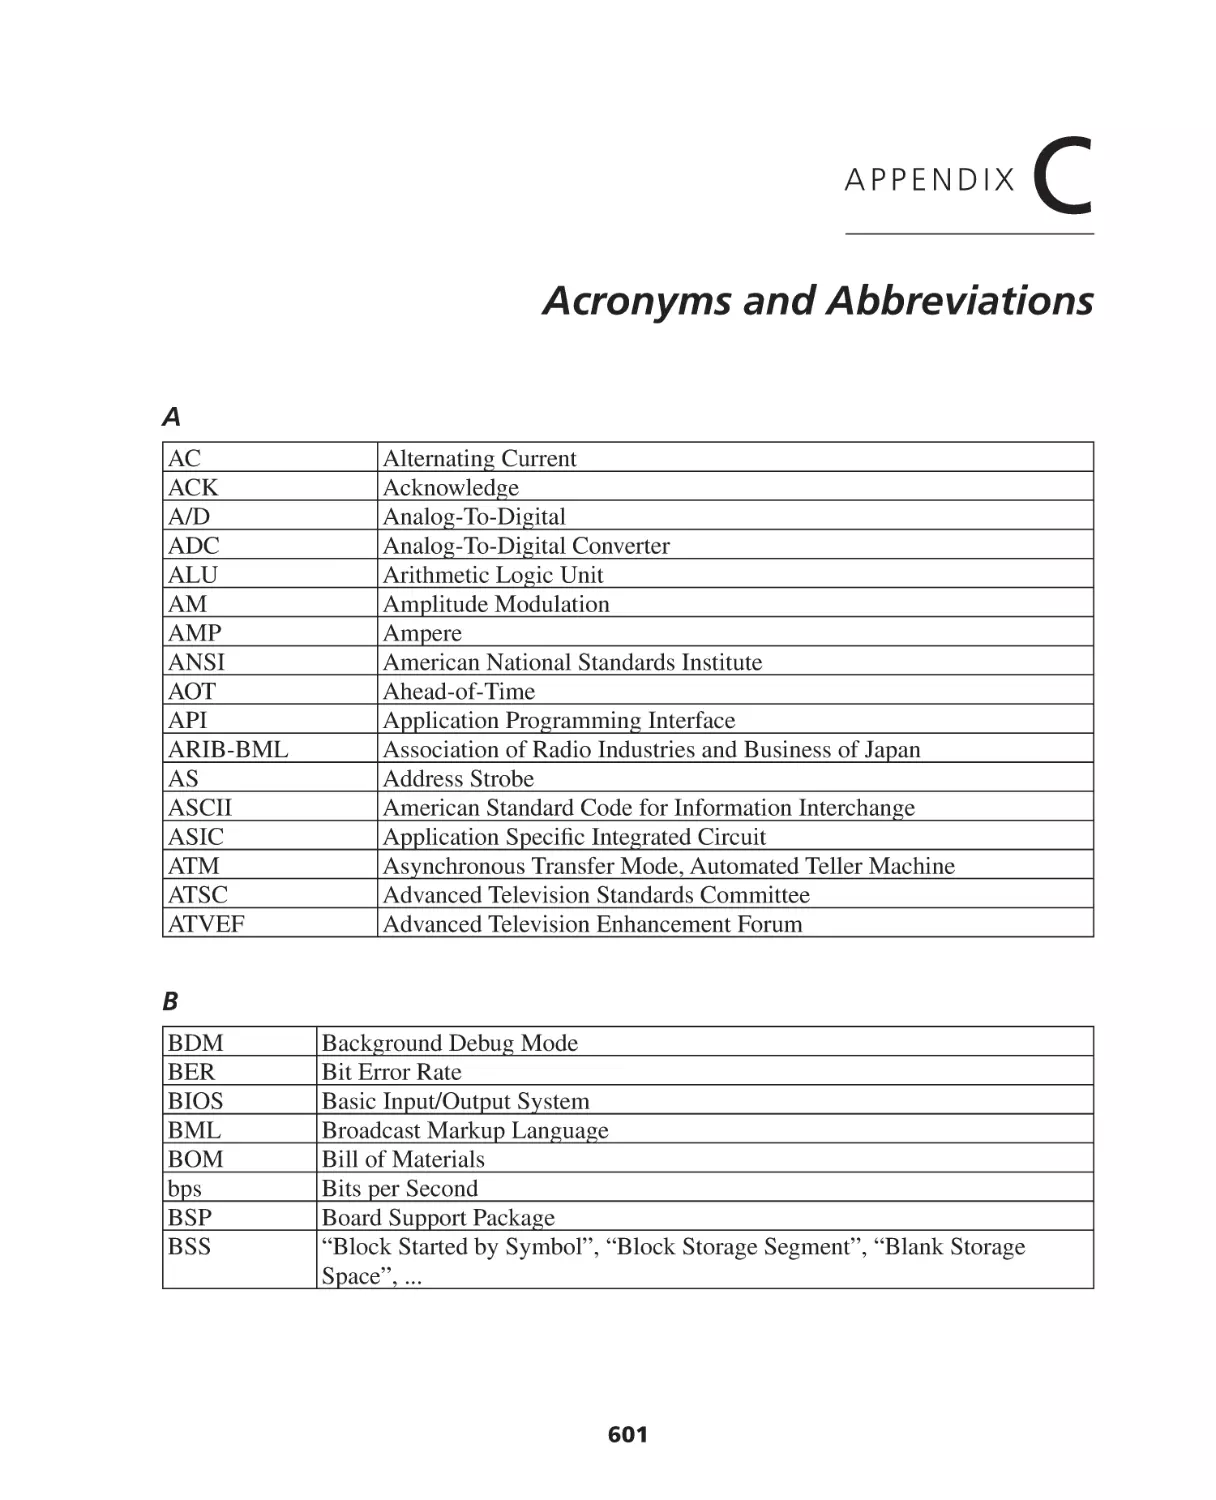 Appendix C. Acronyms and Abbreviations